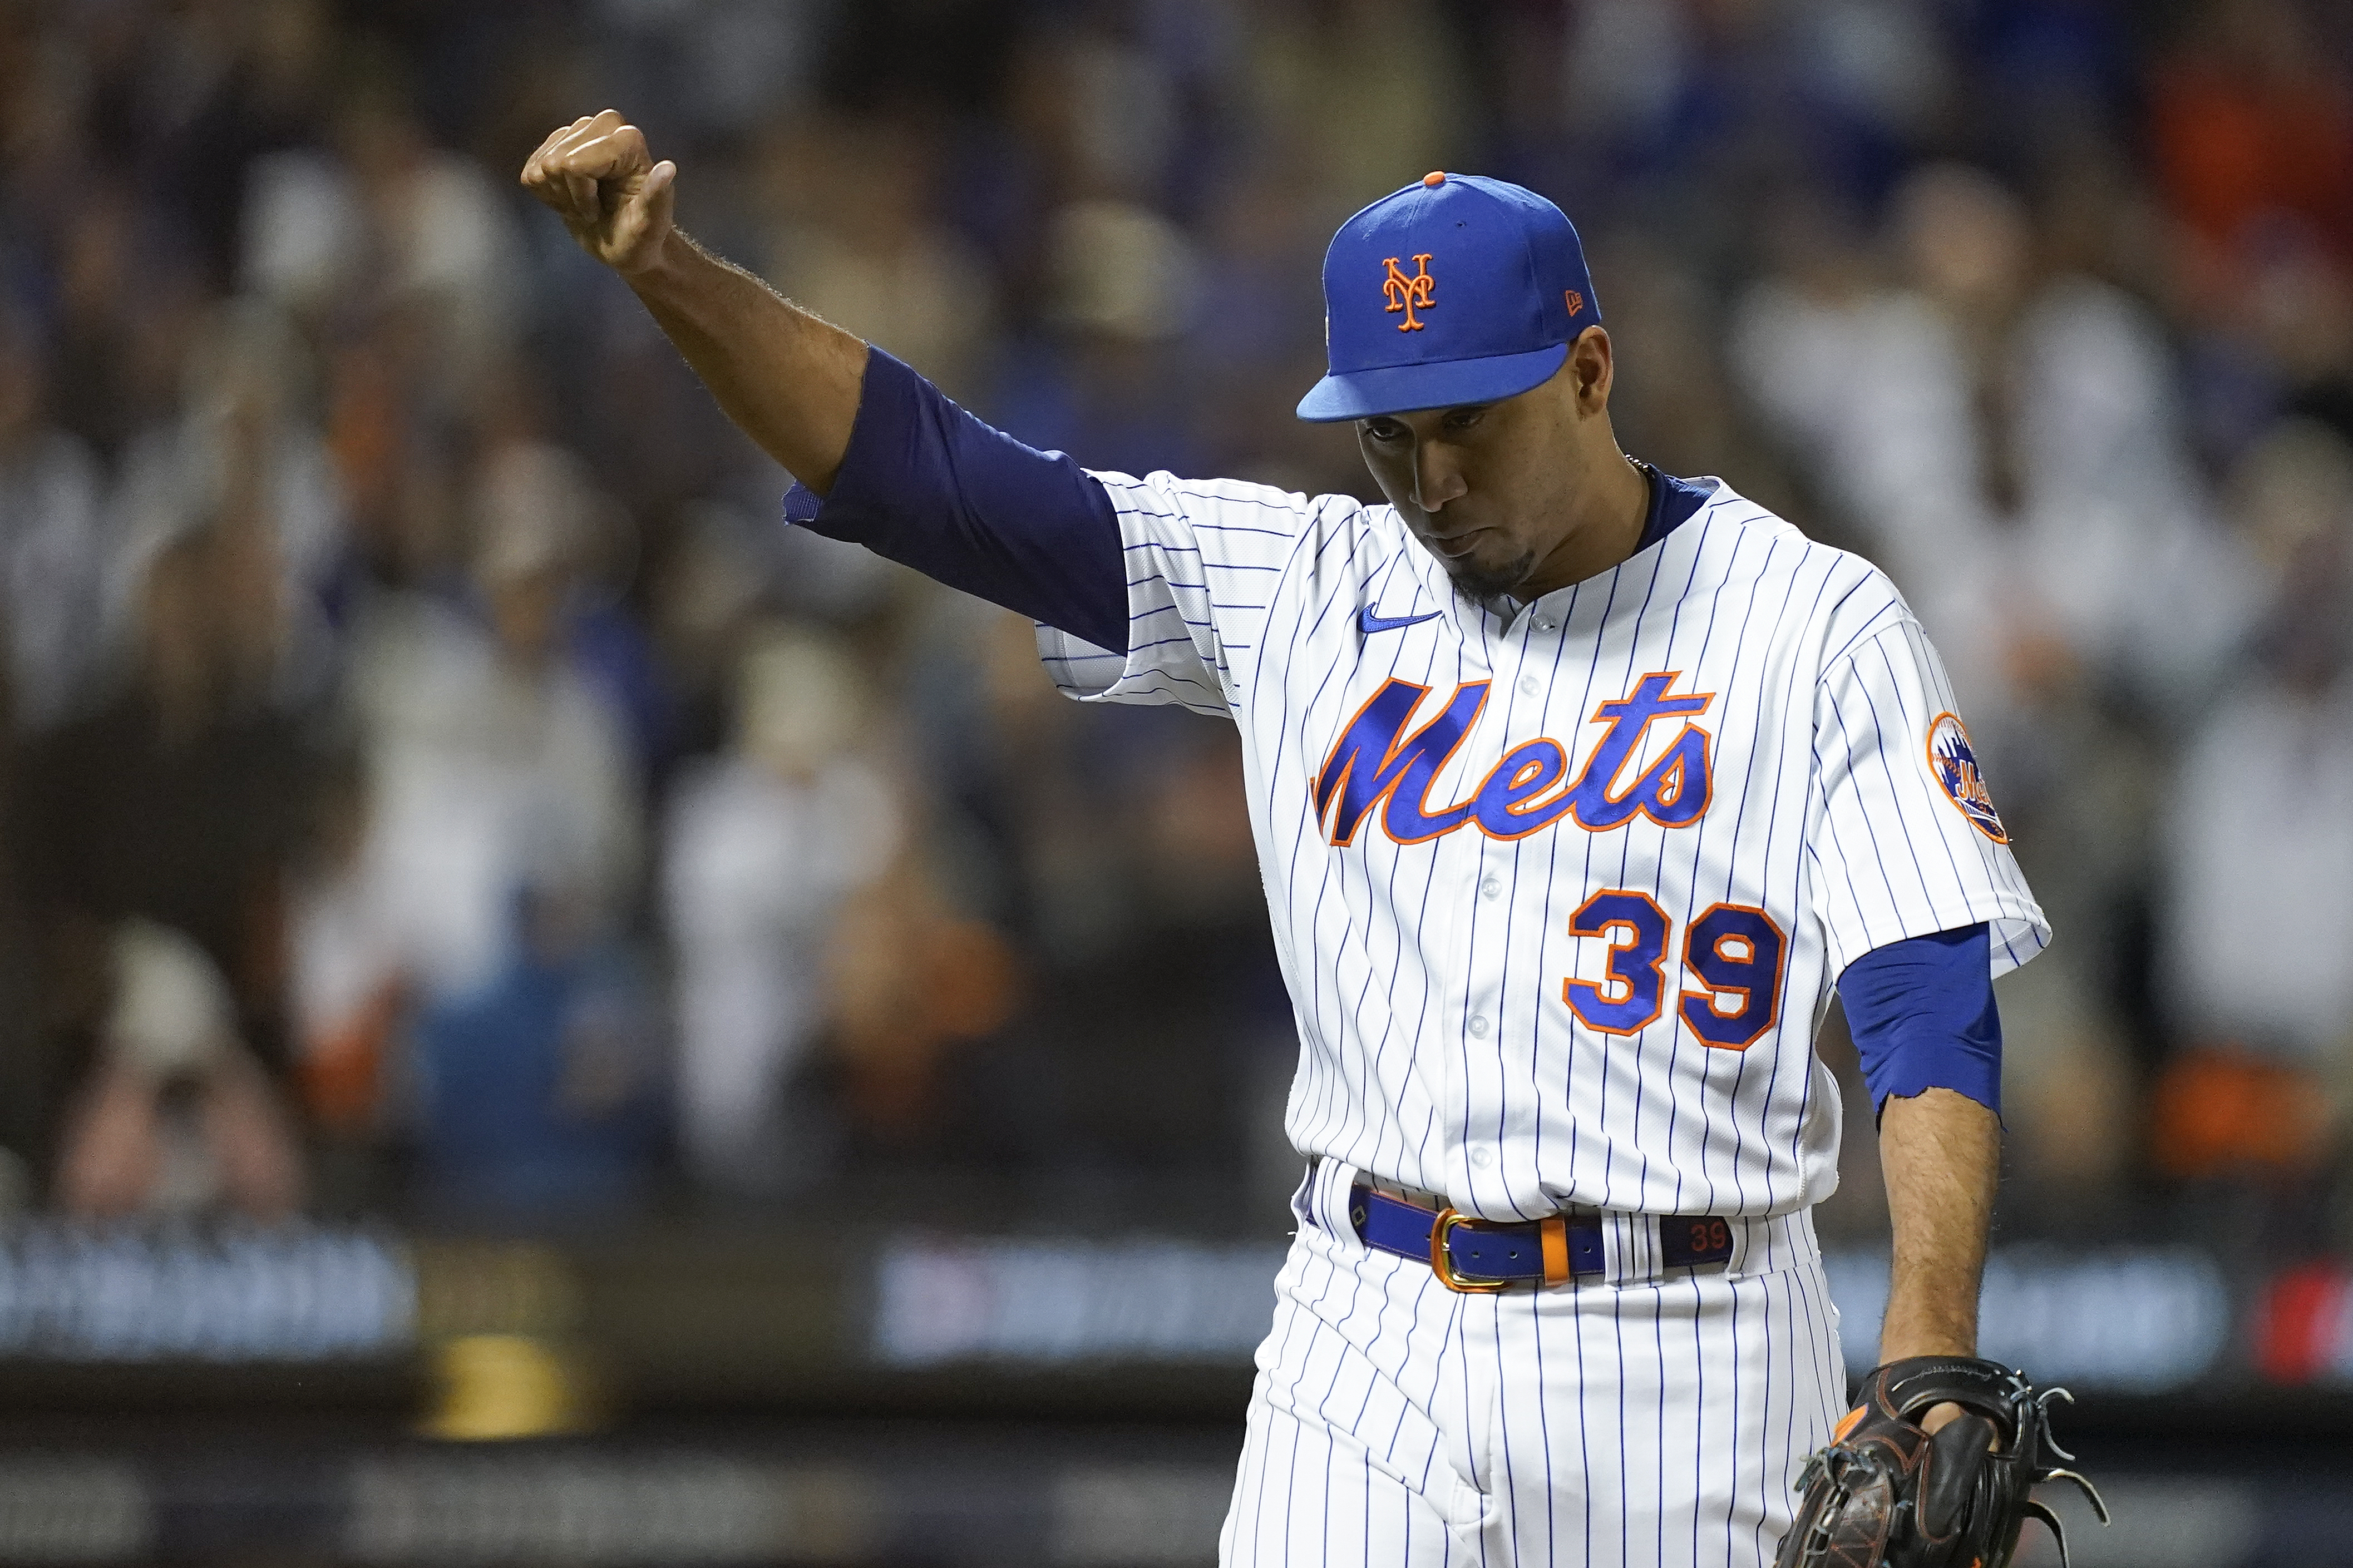 Mets' Edwin Diaz Backed by Blasterjaxx as 'Official' MLB User of